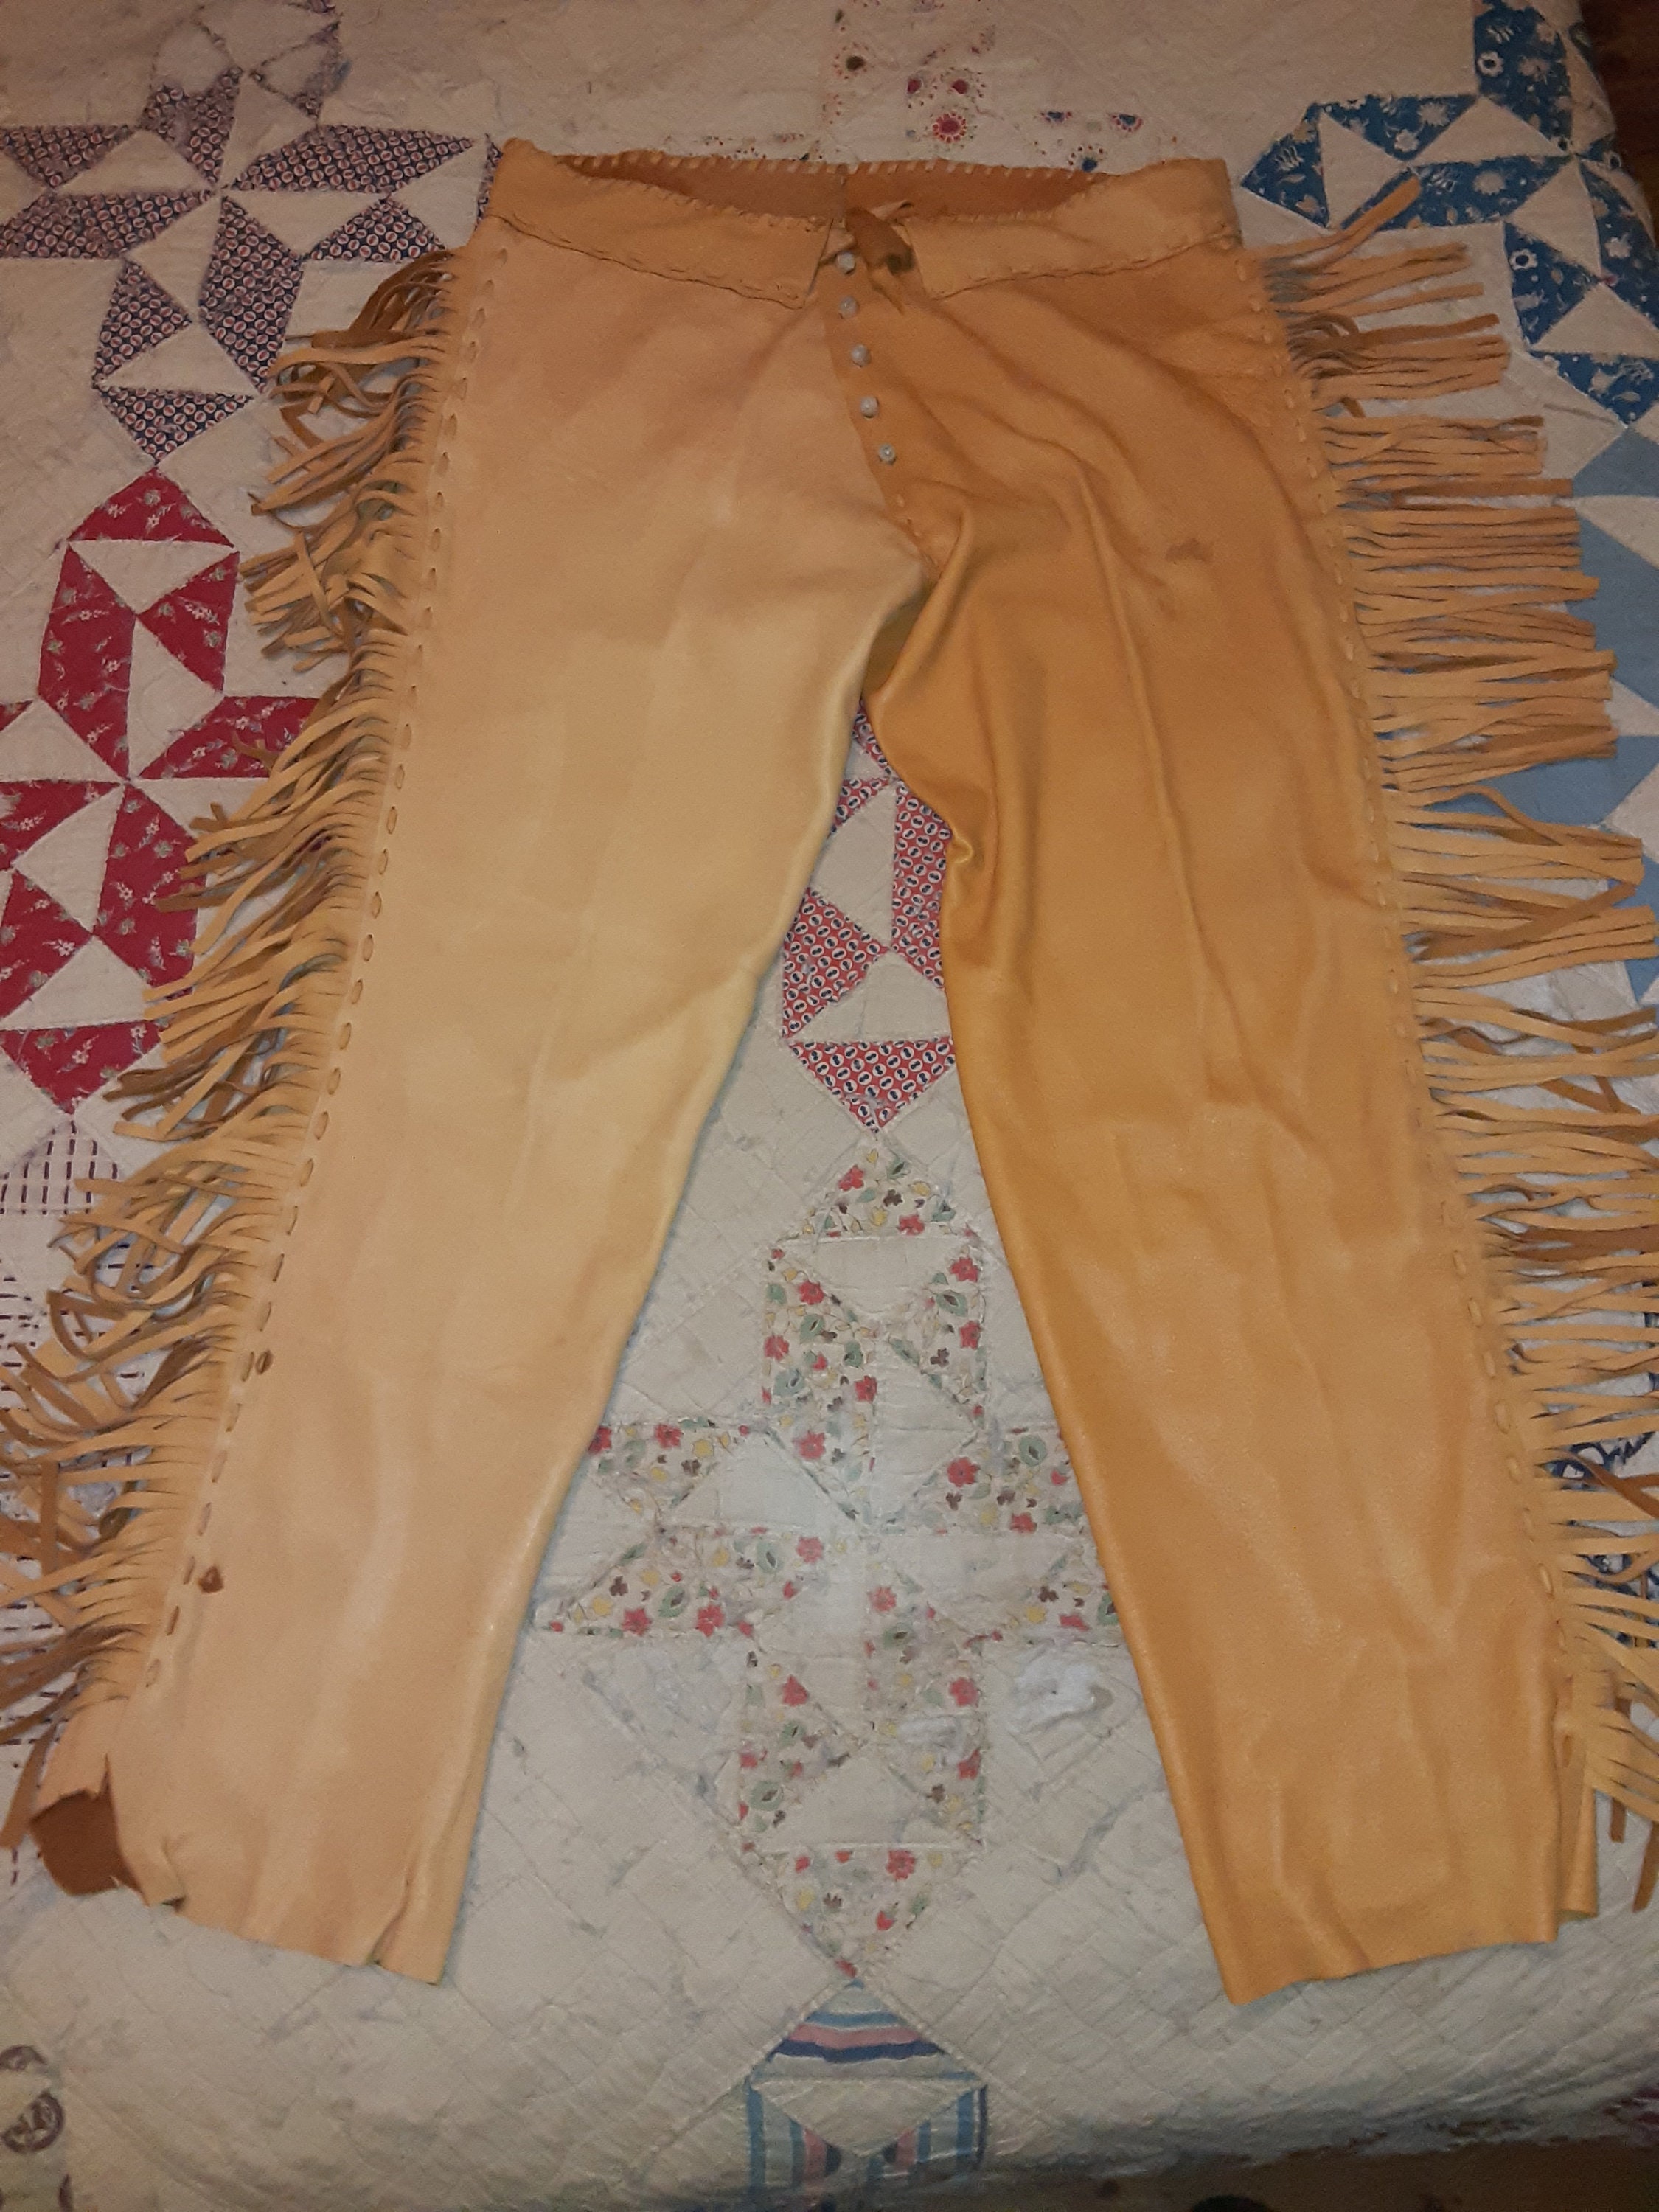 Tanning Hides to make Buckskin clothing in the Powhatan In…